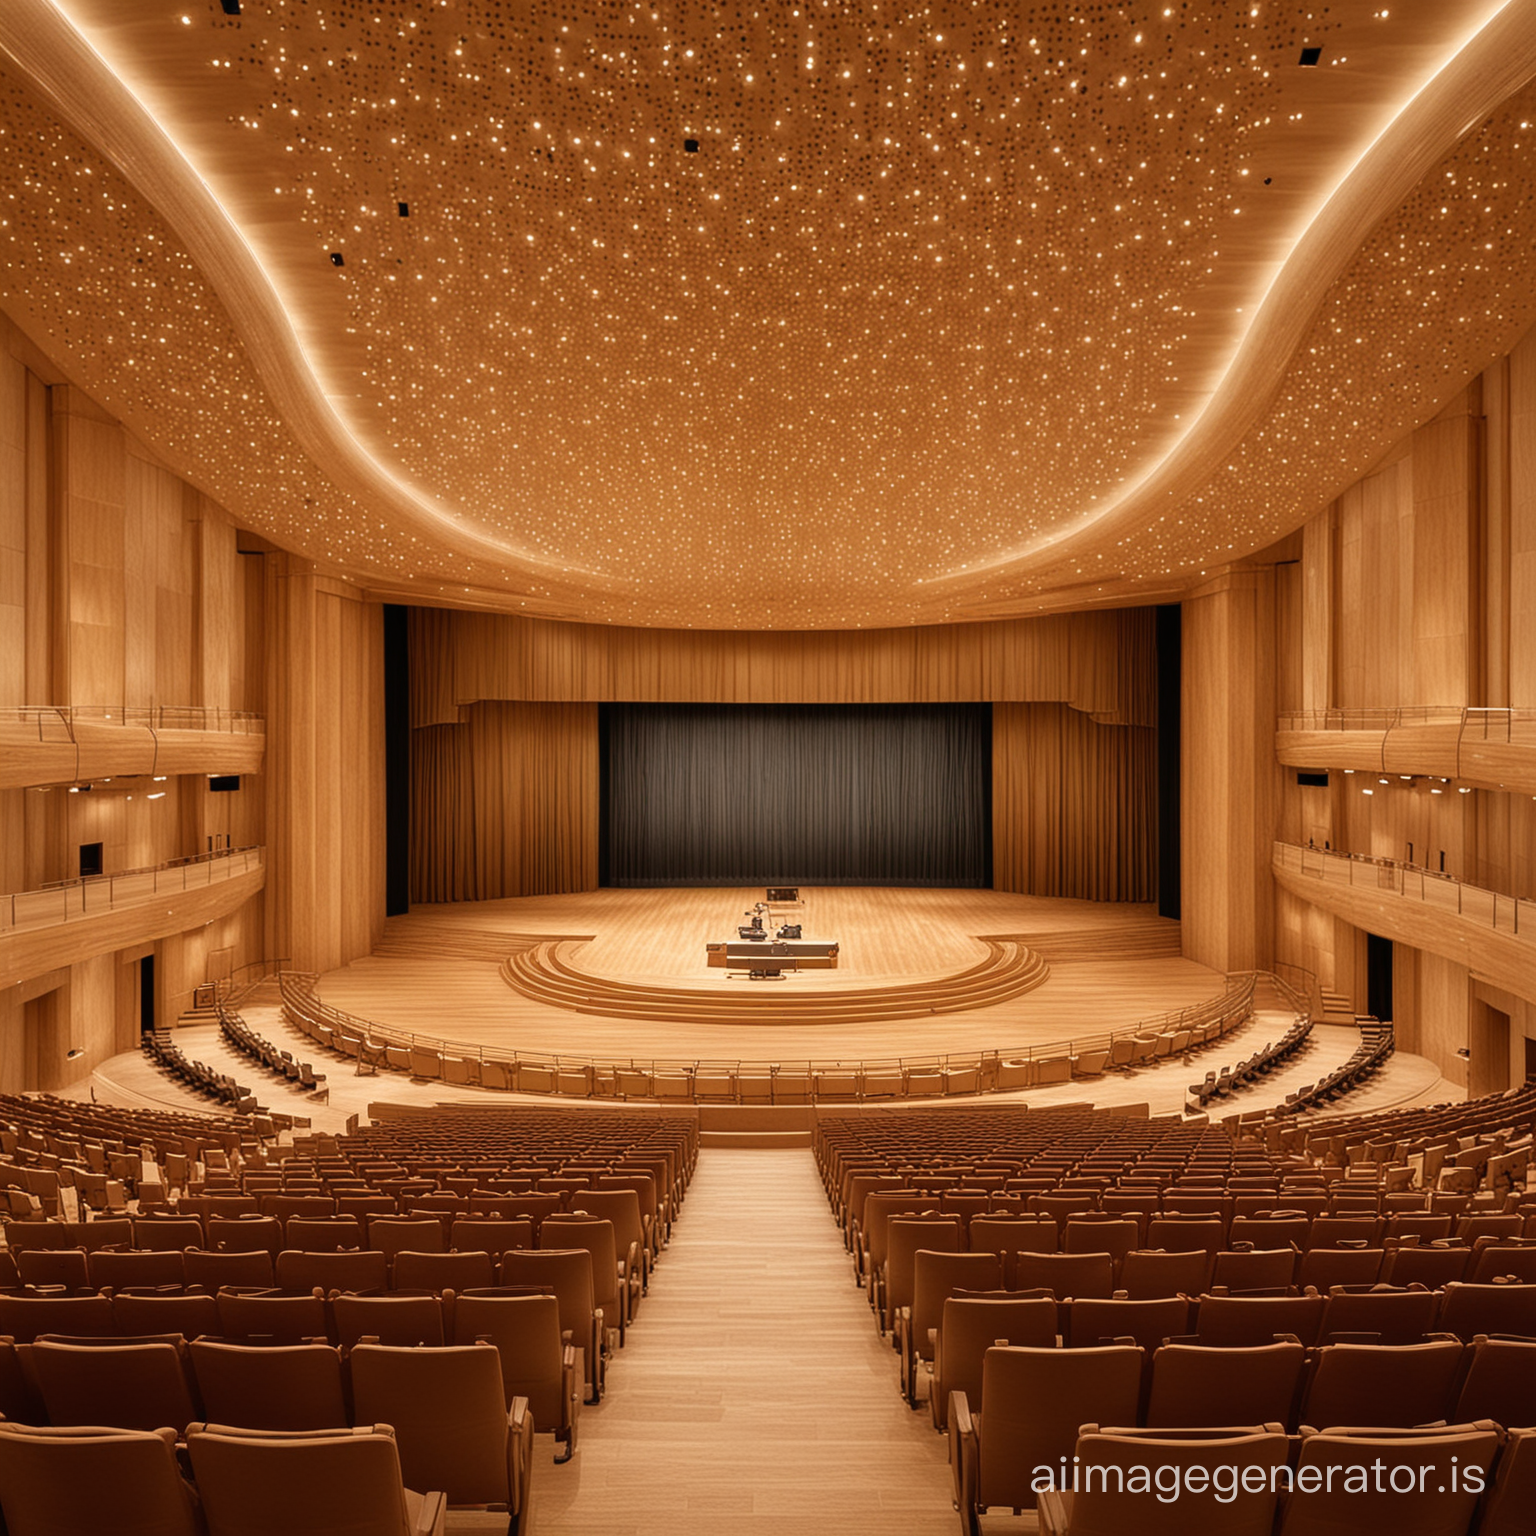 stage of a luxury music hall in Bahrain like Radio City Music Hall Manhattan. the interior architecture is simple light wooden